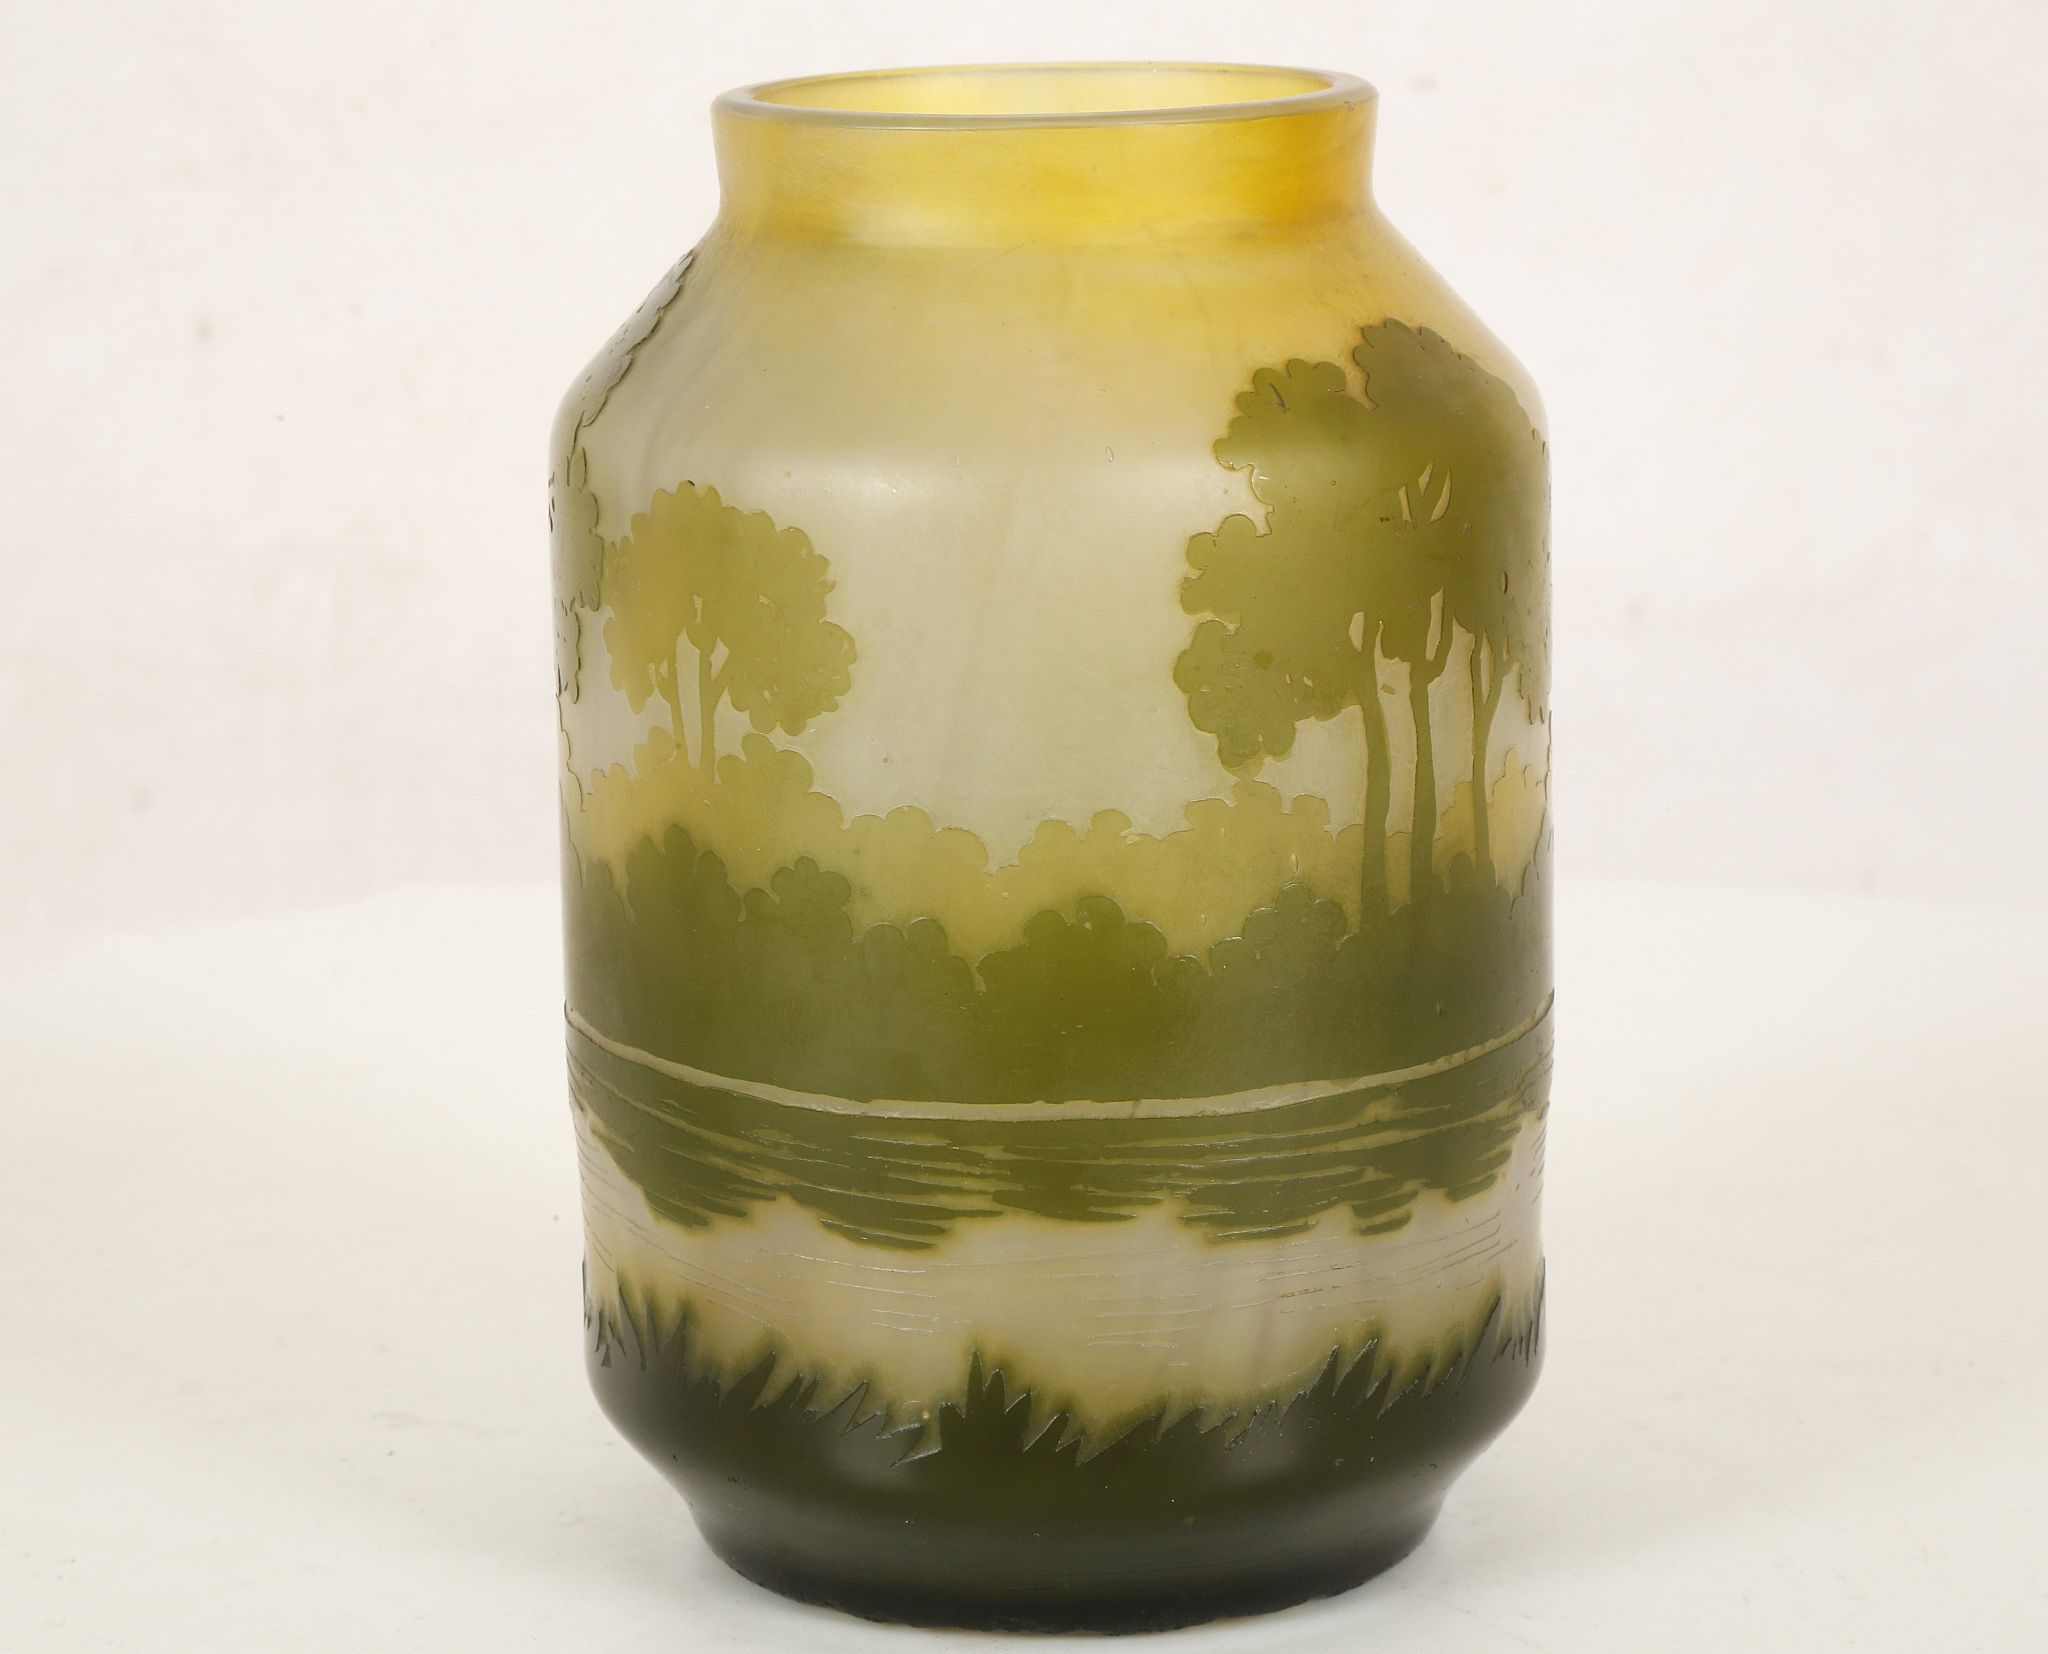 AN EARLY 20th CENTURY CAMEO GLASS VASE MANUFACTURED BY WEIS, DRESDEN, GERMANY, CIRCA 1910, - Image 2 of 4